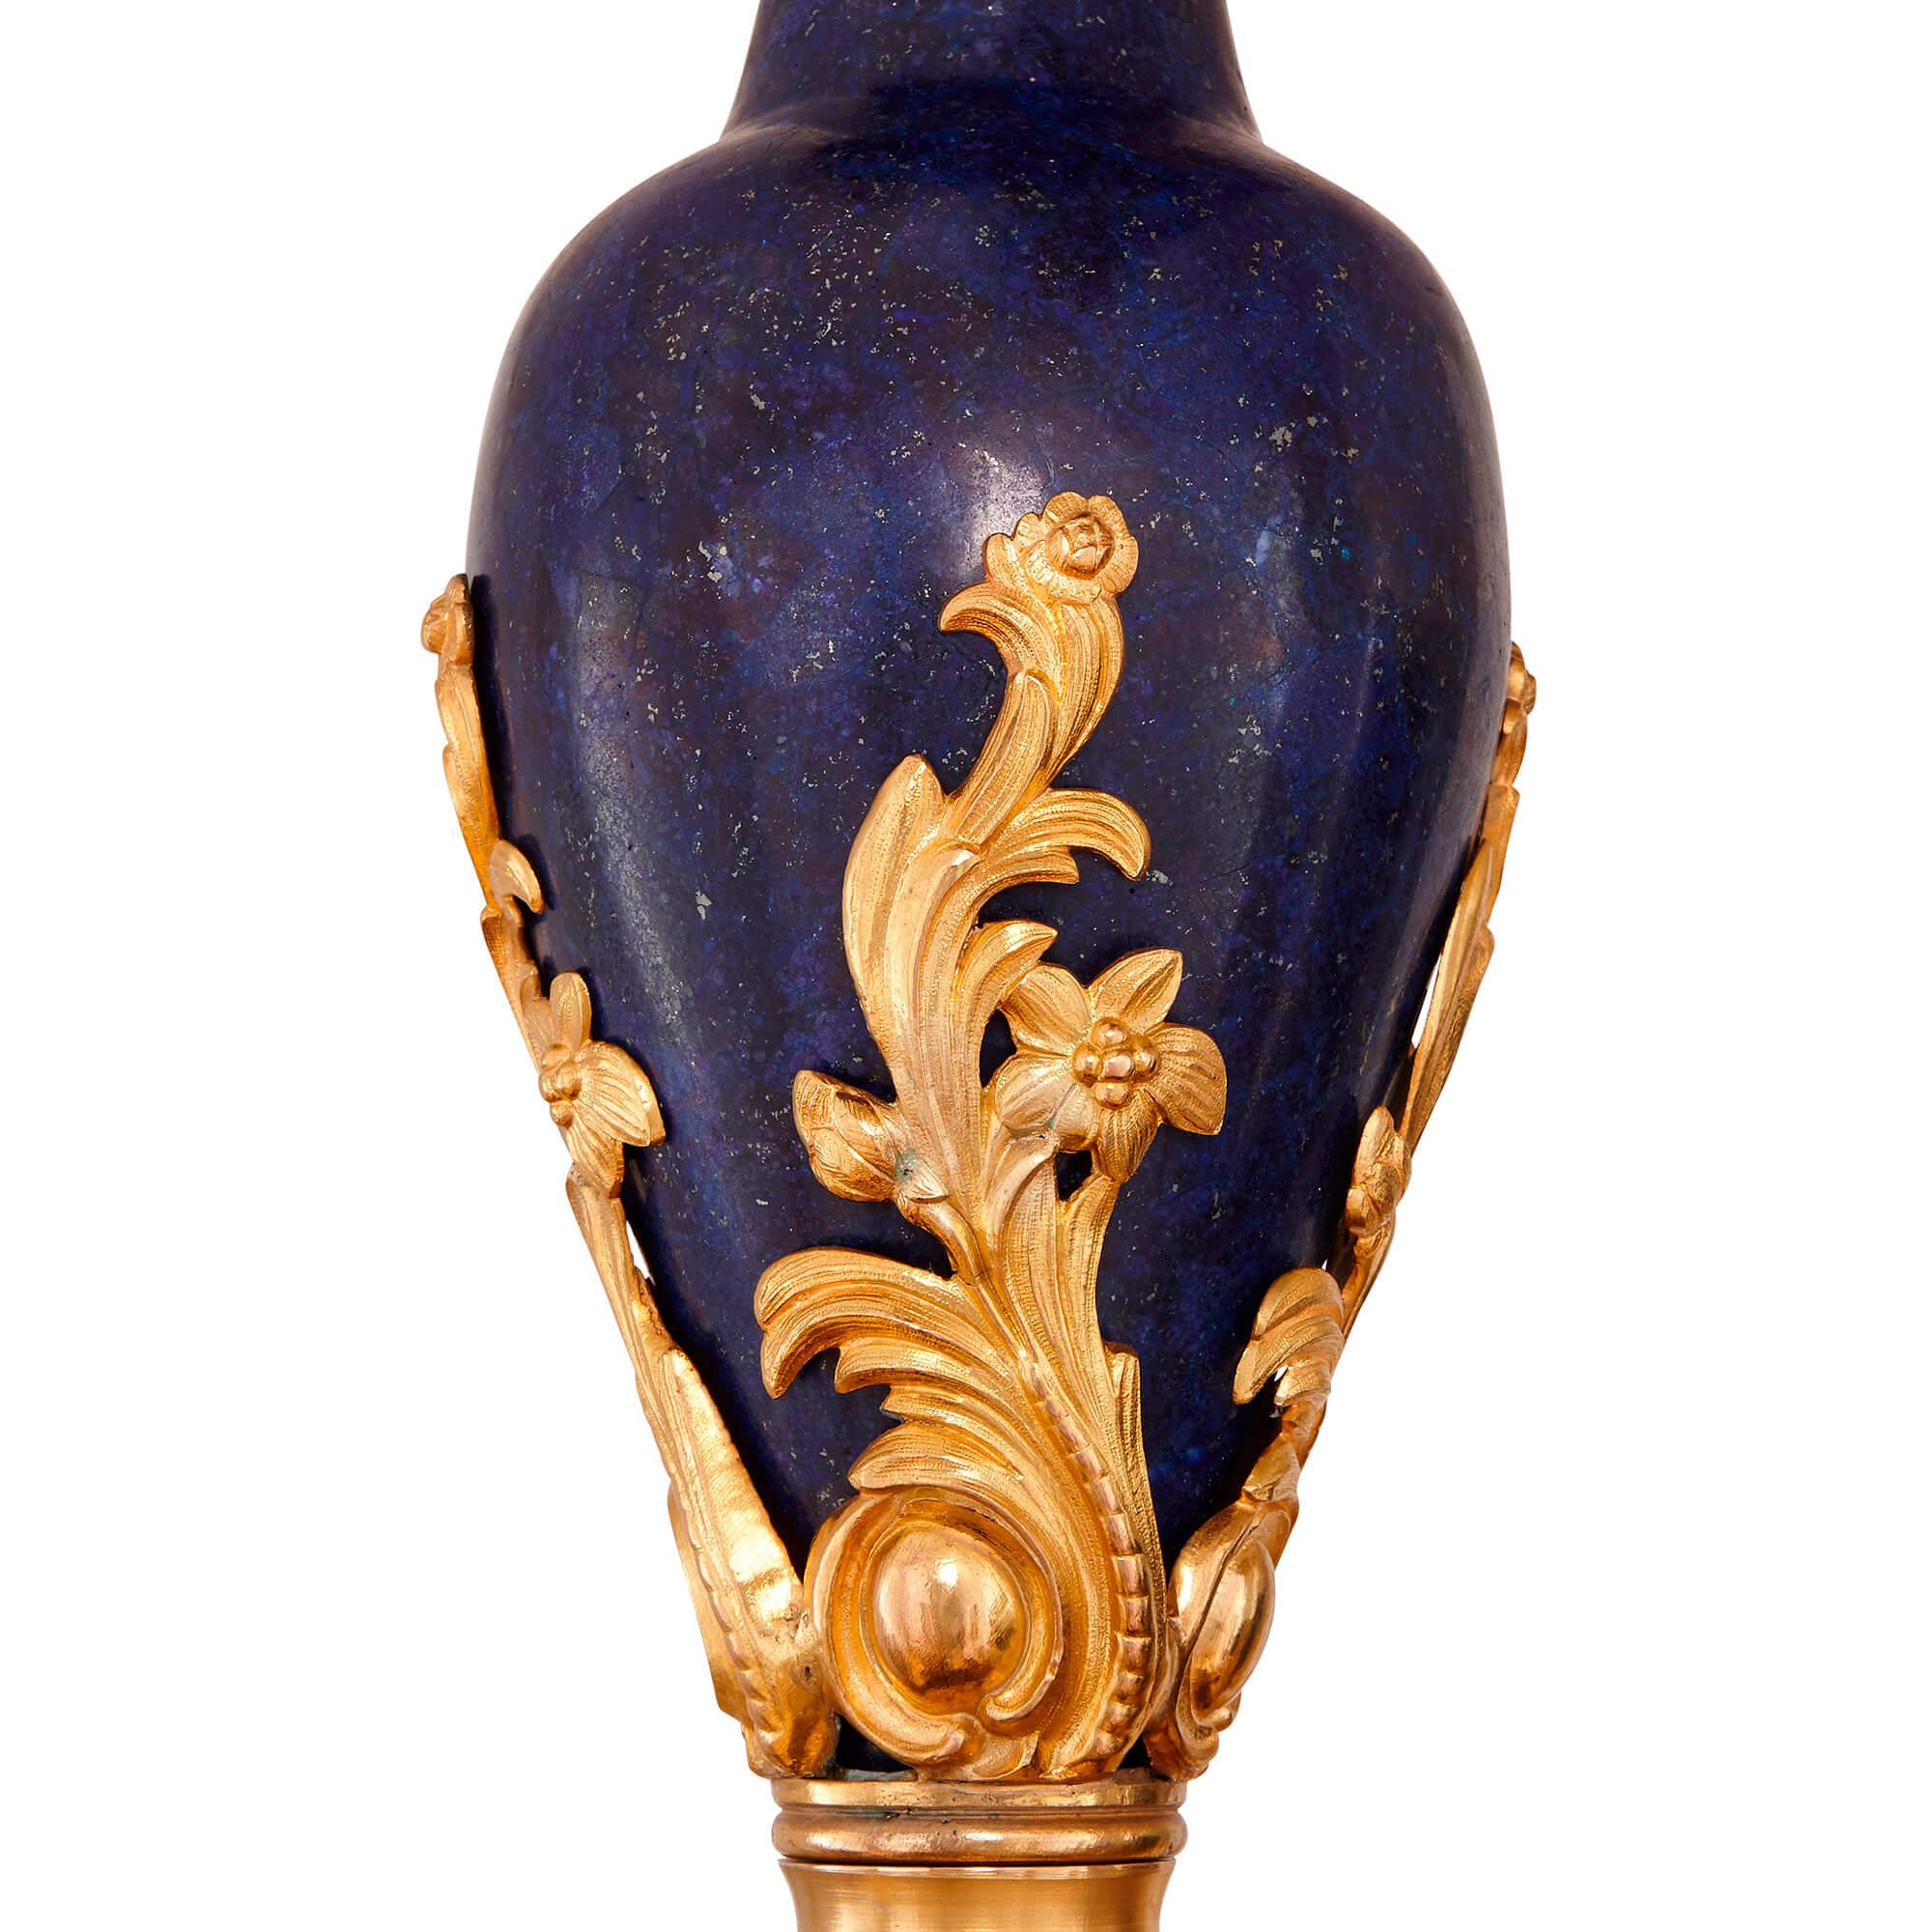 This grand chandelier has been beautifully crafted from precious materials. The body of the piece is veneered in the blue gemstone, lapis lazuli, and is further ornamented with gilt foliate patterns. The chandelier dates originally from the late